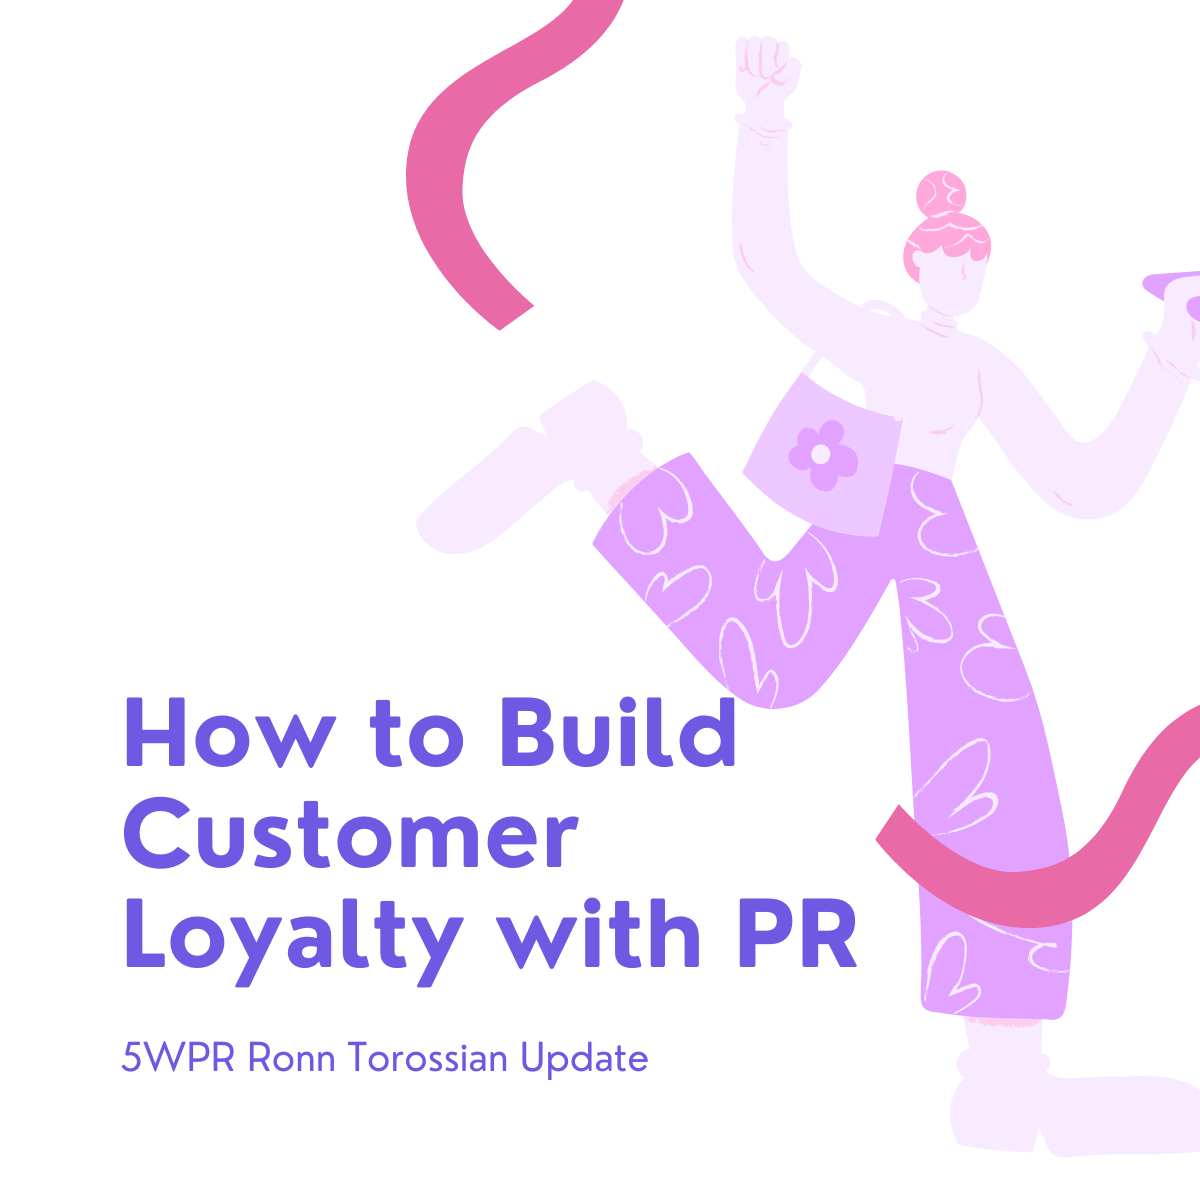 How to Build Customer Loyalty with PR